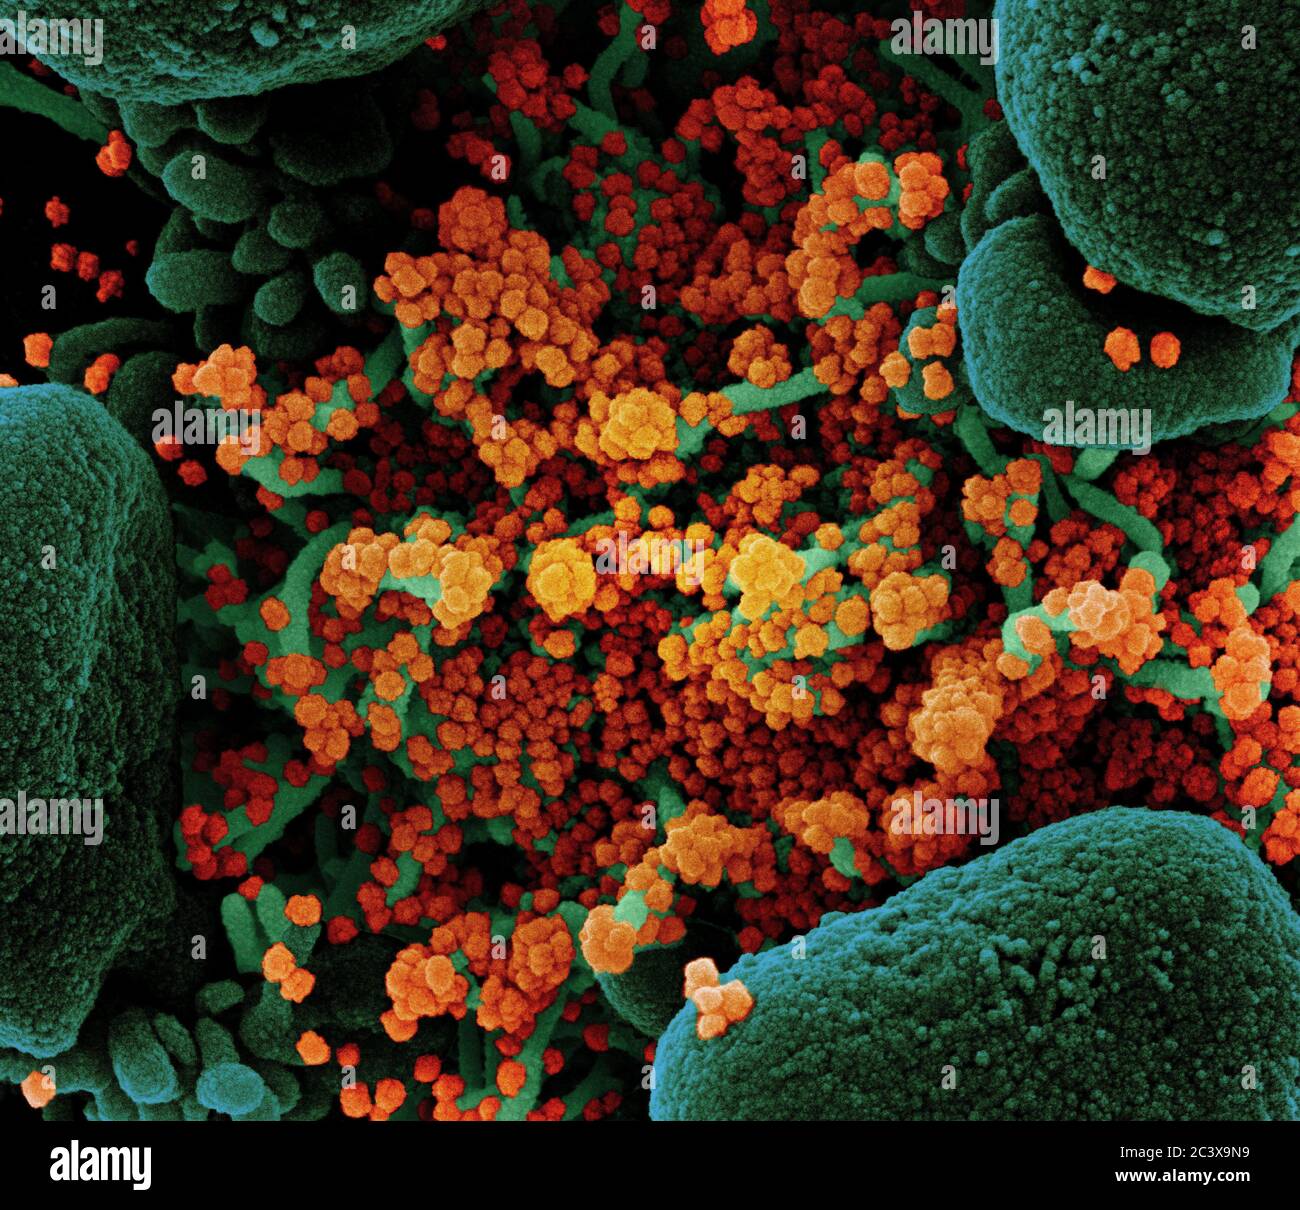 Novel Coronavirus SARS-CoV-2 Colorized scanning electron micrograph of an apoptotic cell (green) heavily infected with SARS-COV-2 virus particles (orange), isolated from a patient sample. Image at the NIAID Integrated Research Facility (IRF) in Fort Detrick, Maryland. Stock Photo